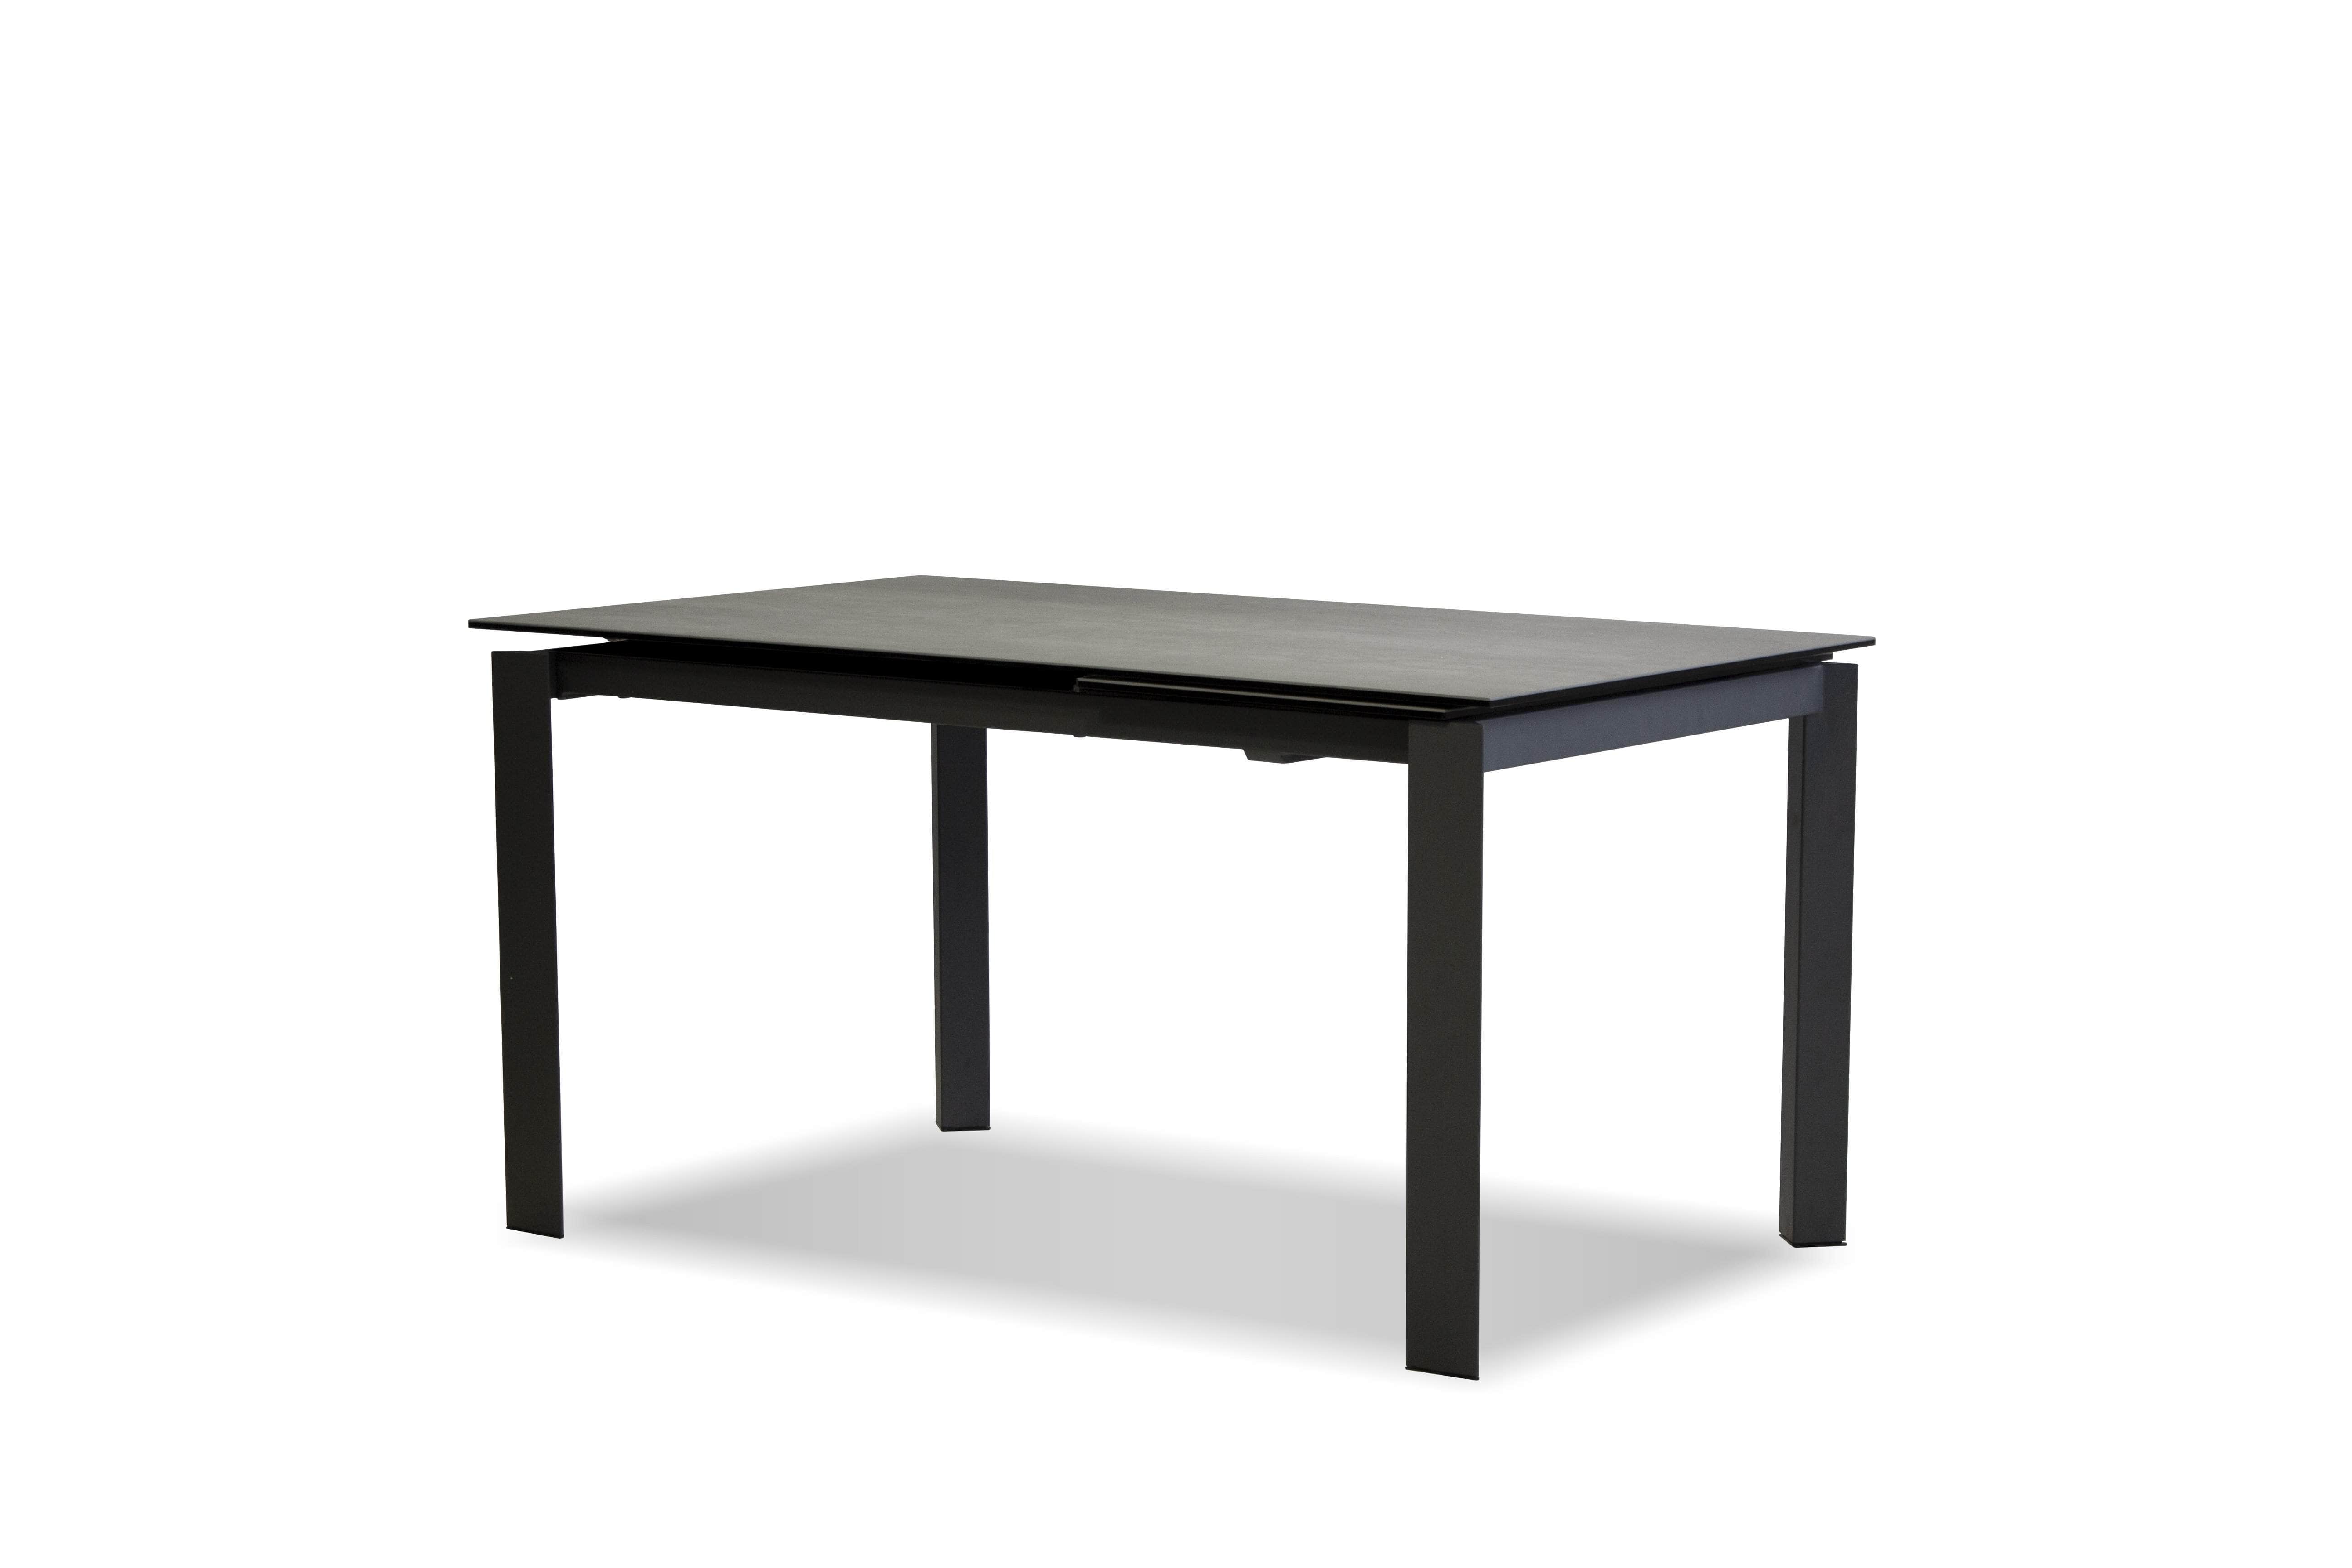 Casper Extendable Dining Table with Concrete Grey Ceramic Top and Grey Powder Coated Base